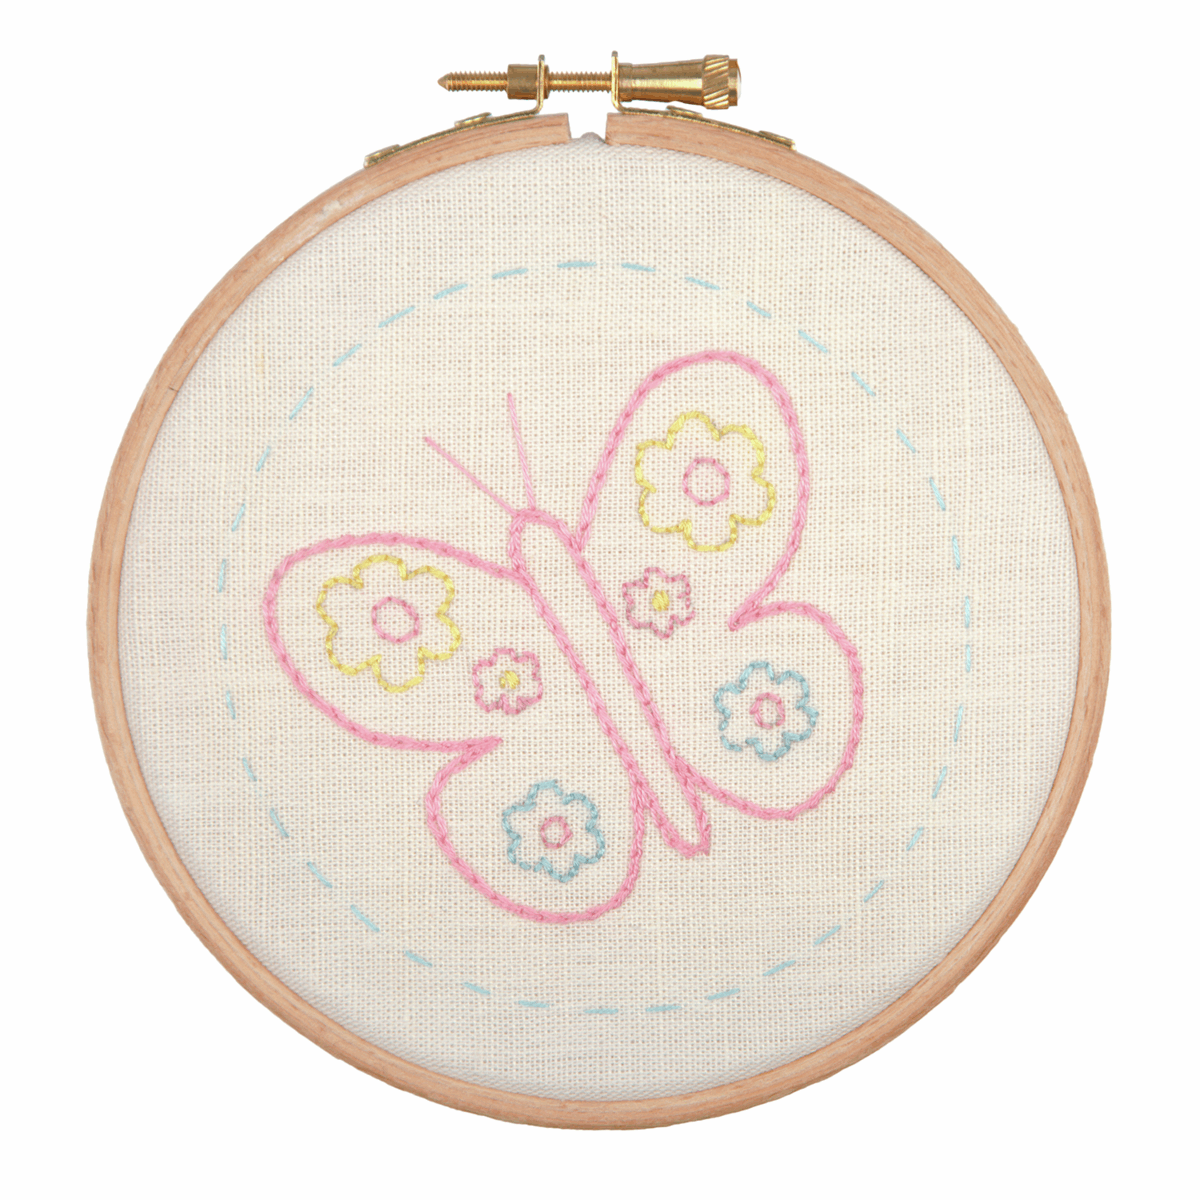 Anchor Embroidery Hoop Kit - Beautiful Butterfly